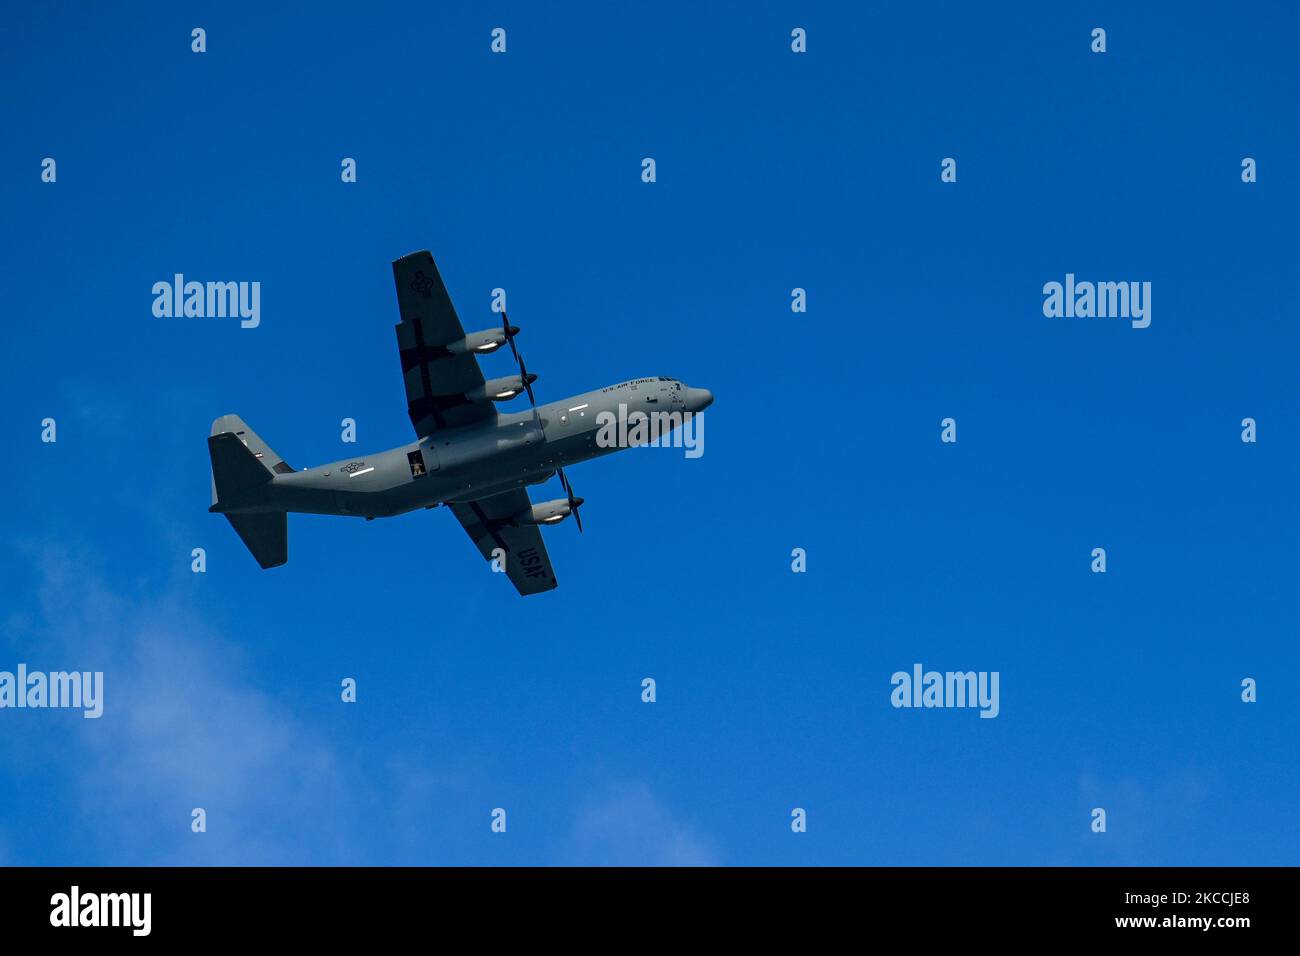 Members assigned to joint special operations forces fly a C-130J Hercules aircraft assigned to the 815th Airlift Squadron, Keesler Air Force Base, Mississippi, over MacDill Air Force Base, Florida, Nov. 3, 2022.The joint operations exercise included members assigned to the U.S. Special Operations Command, Special Operations Command Central and Joint Communications Support Element. (U.S. Air Force photo by Airman 1st Class Zachary Foster) Stock Photo